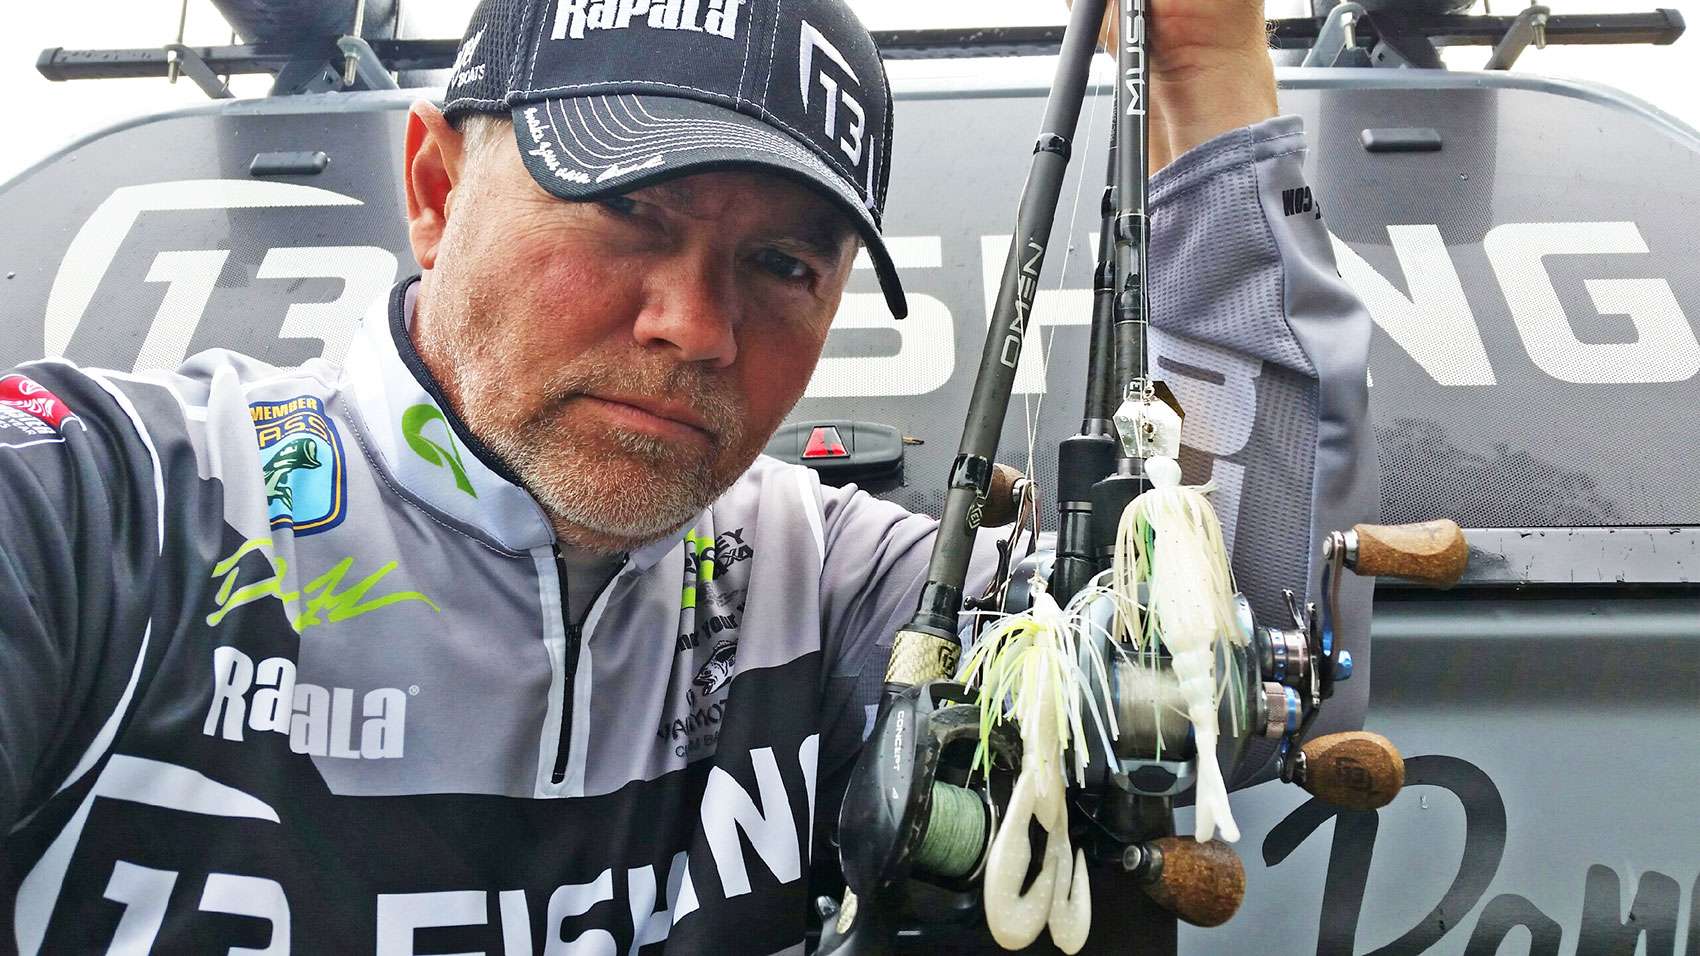 <b>Dave Lefebre</b><br> Dave Lefebre fished a shallow flat featuring a mix of aquatic grasses and lily pads. He chose this trio of lures. From right, Z Man Original Chatterbait, custom skirt and craw trailer. At left is a Terminator Swim Jig with a craw trailer.  